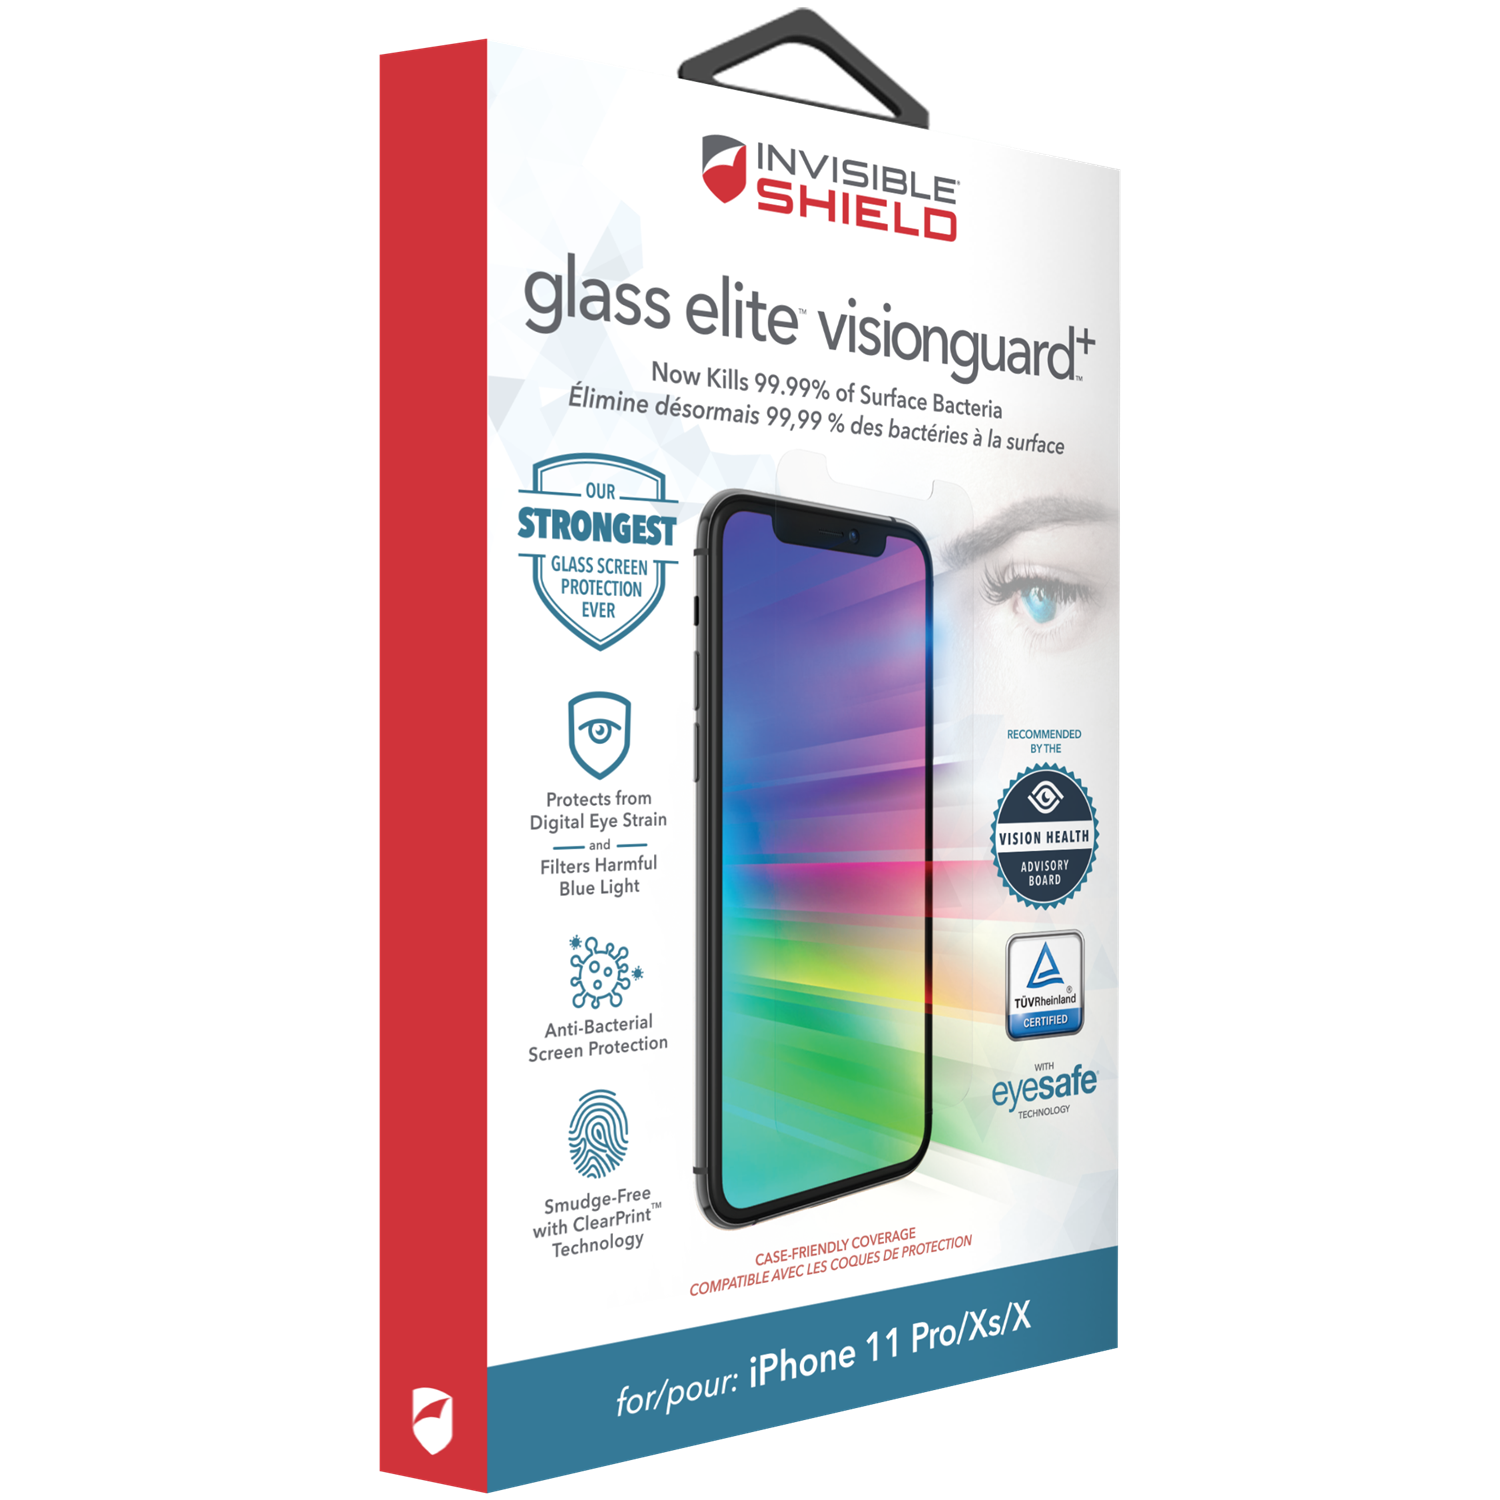 InvisibleShield Glass Elite Visionguard+ iPhone X/XS